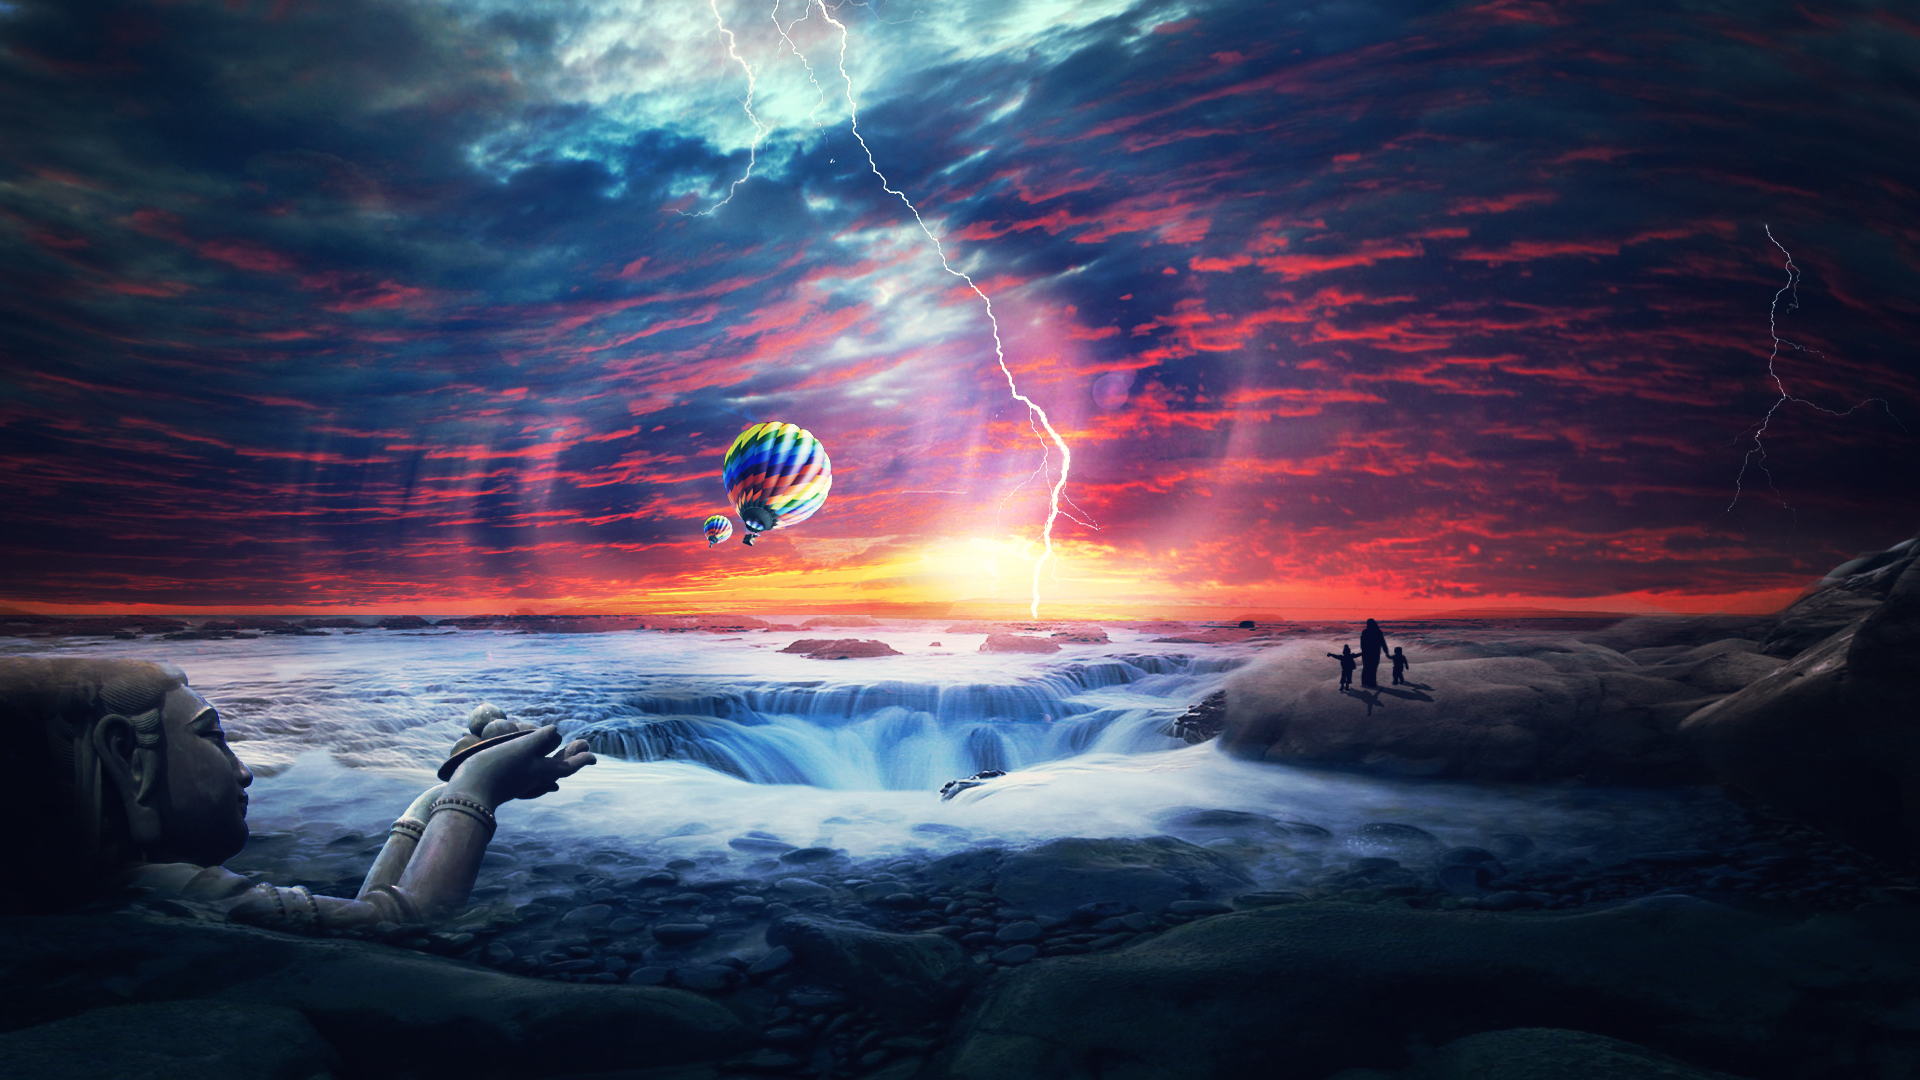 Heaven Sunset Sea Airballons Wallpapers HD Backgrounds